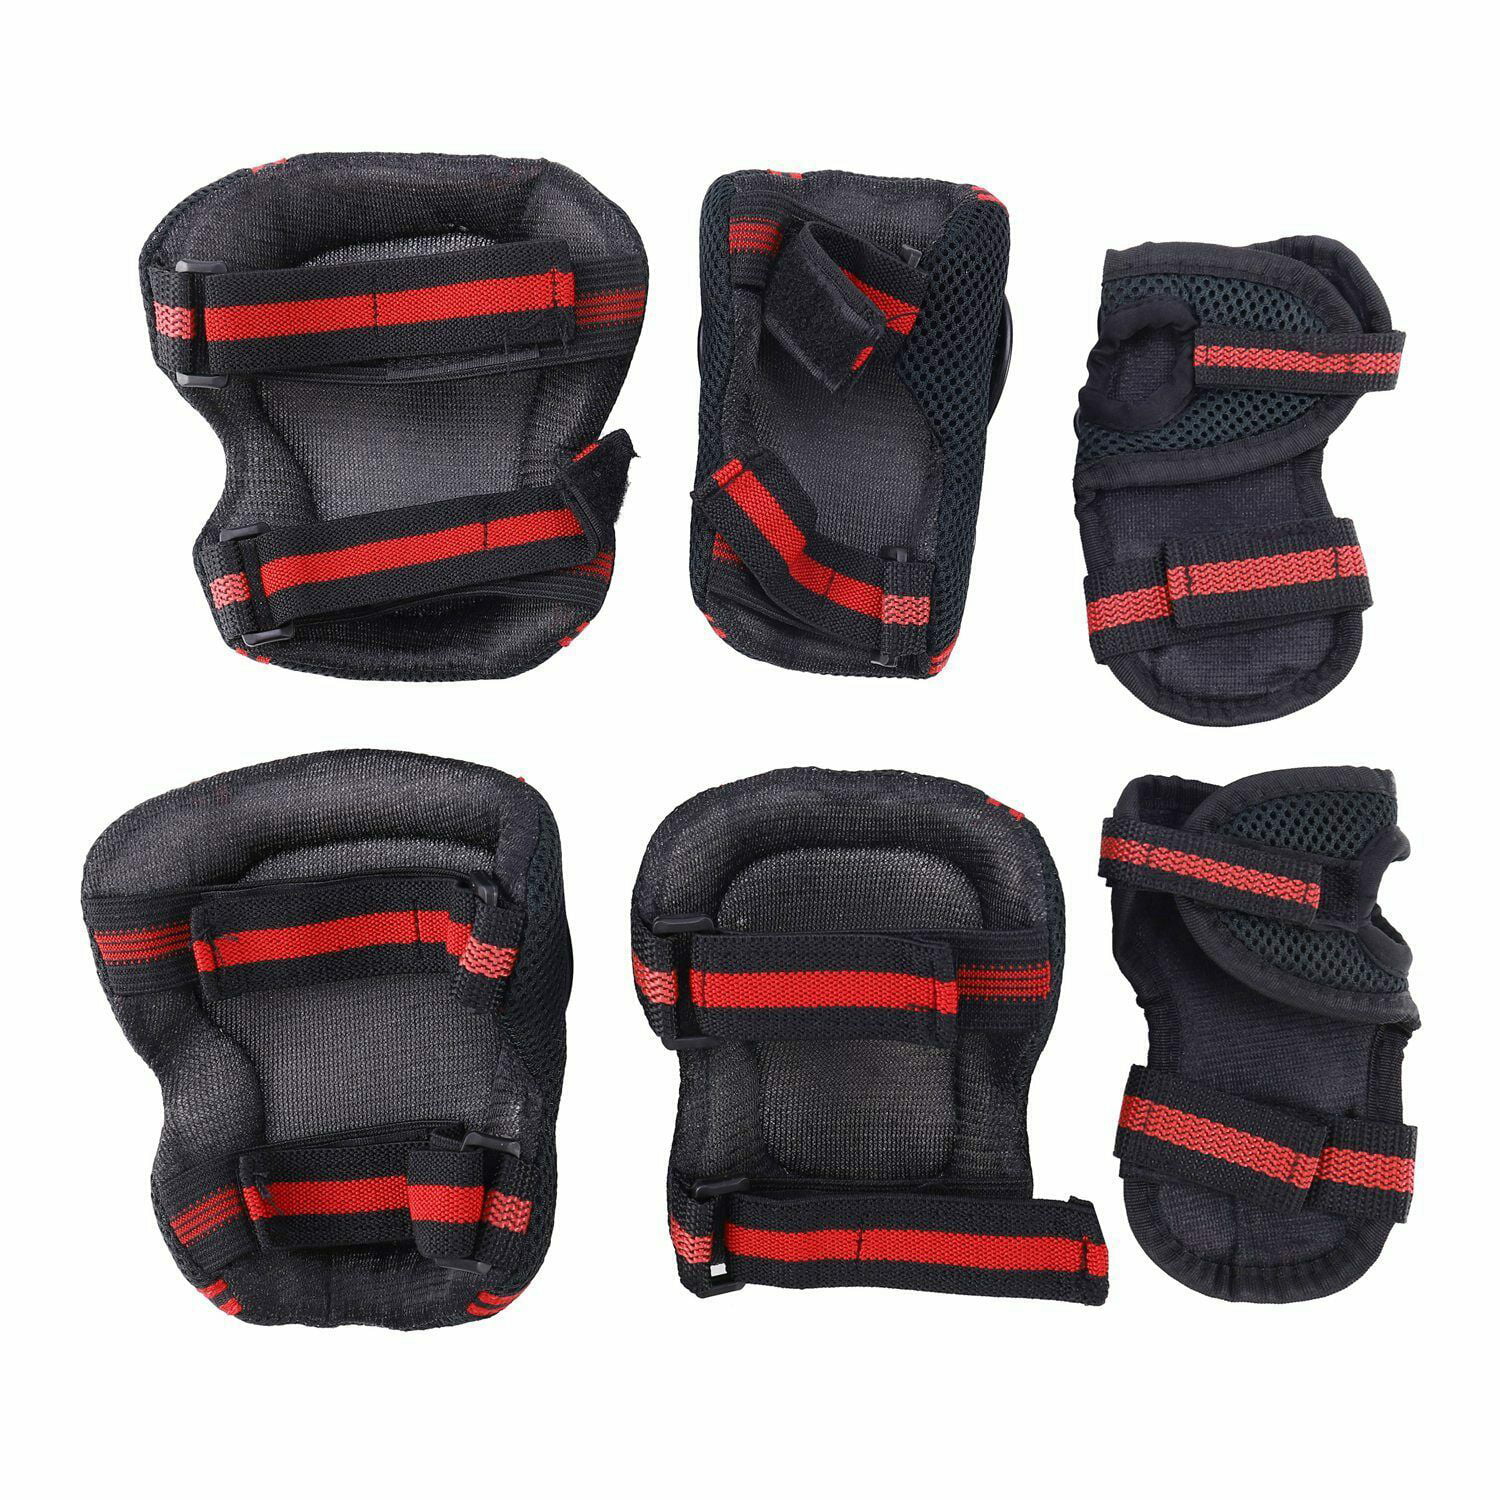 Details about   Set of 6 Children Elbow Wrist Knee Pads Sport Safety Protective Gear Guard Kid v 